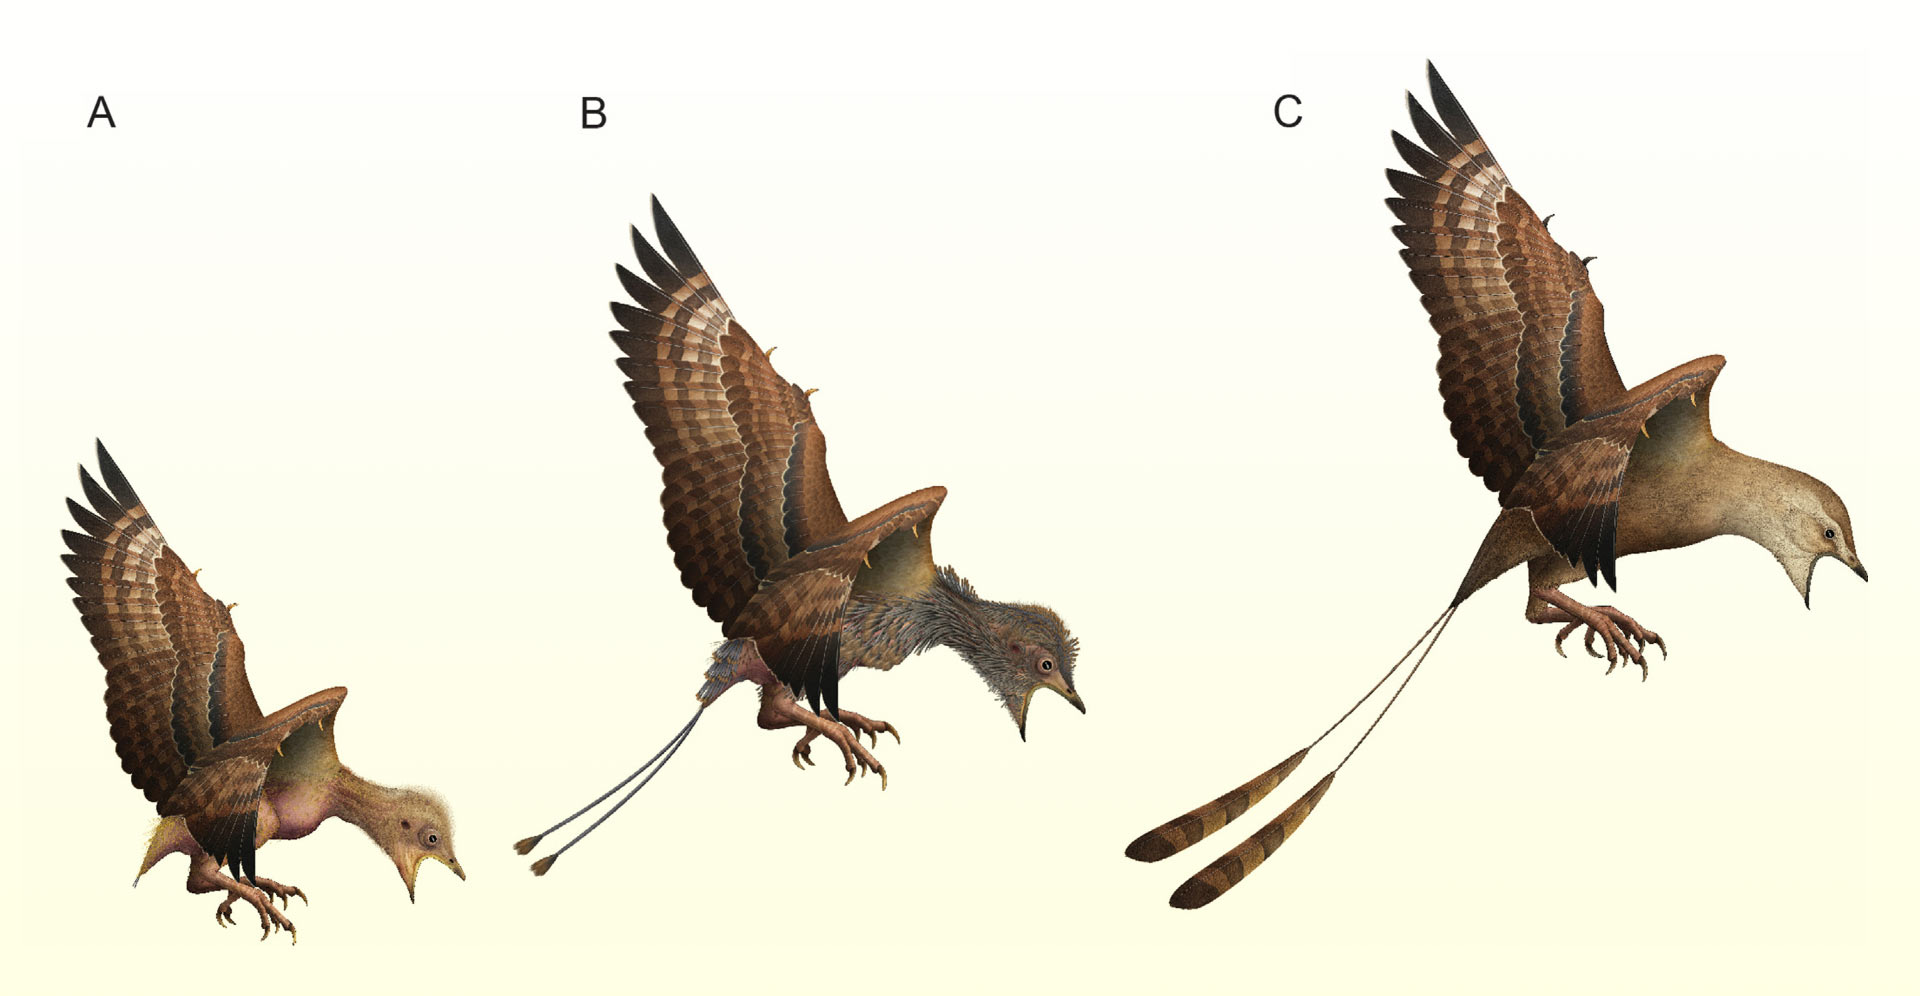 Hypothetical molt cycle in juvenile enantiornithine birds: (A) hatchling bird with sparse natal body plumage; (B) rapid molt; (C) juvenile with juvenal plumage including fully developed rachis dominated feathers.